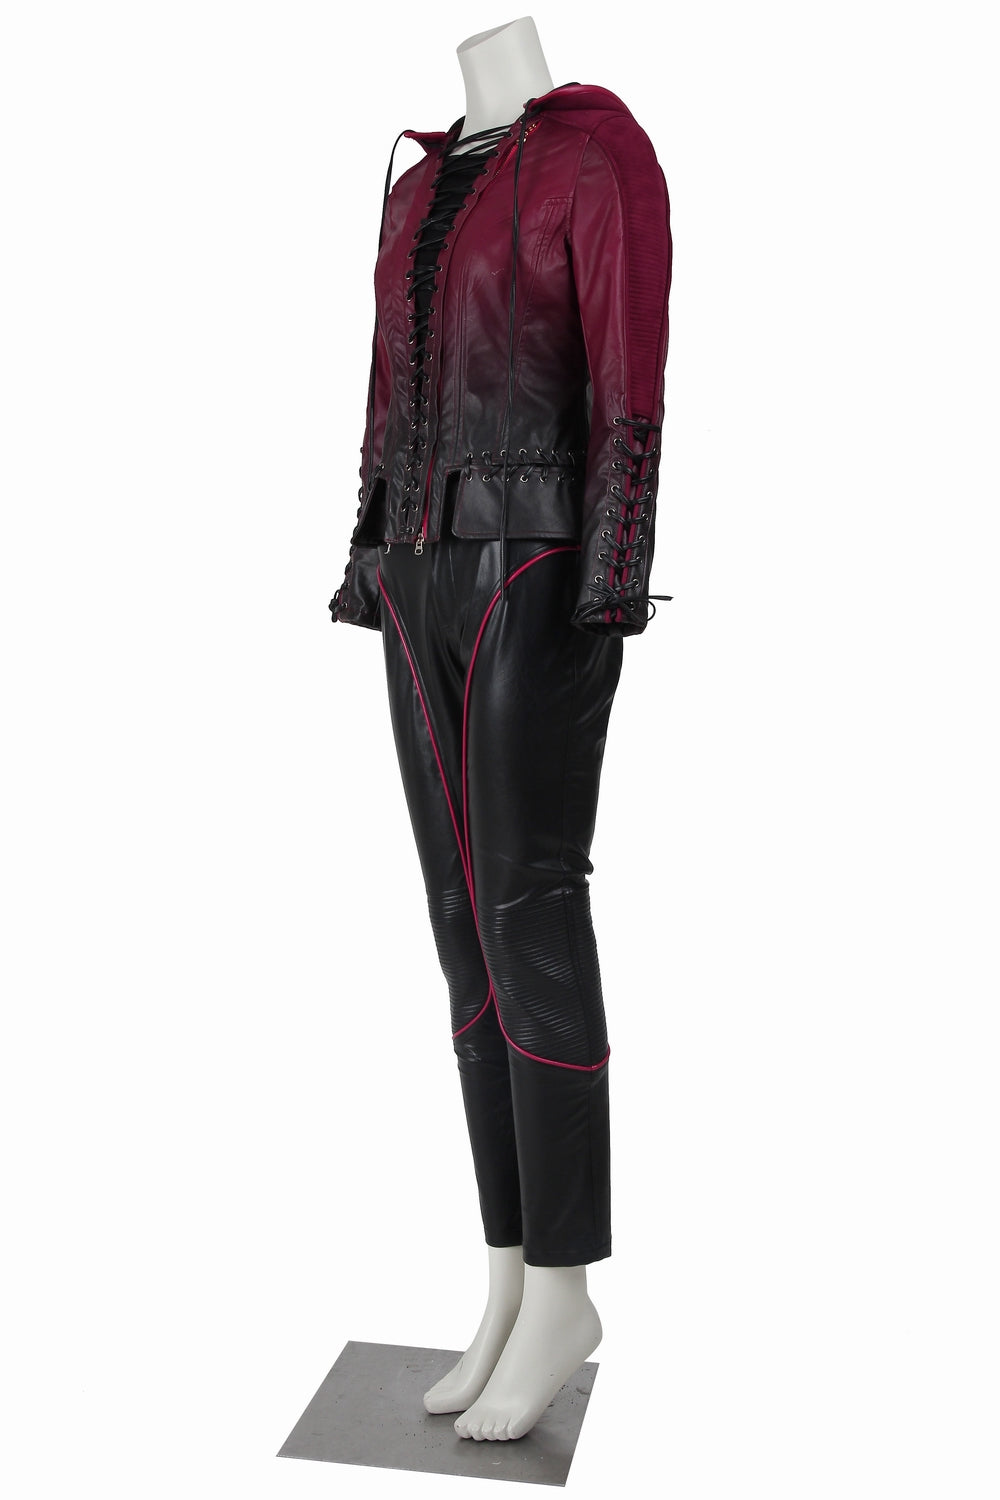 Your DIY Thea Queen Costume Guide To Become The Next Speedy